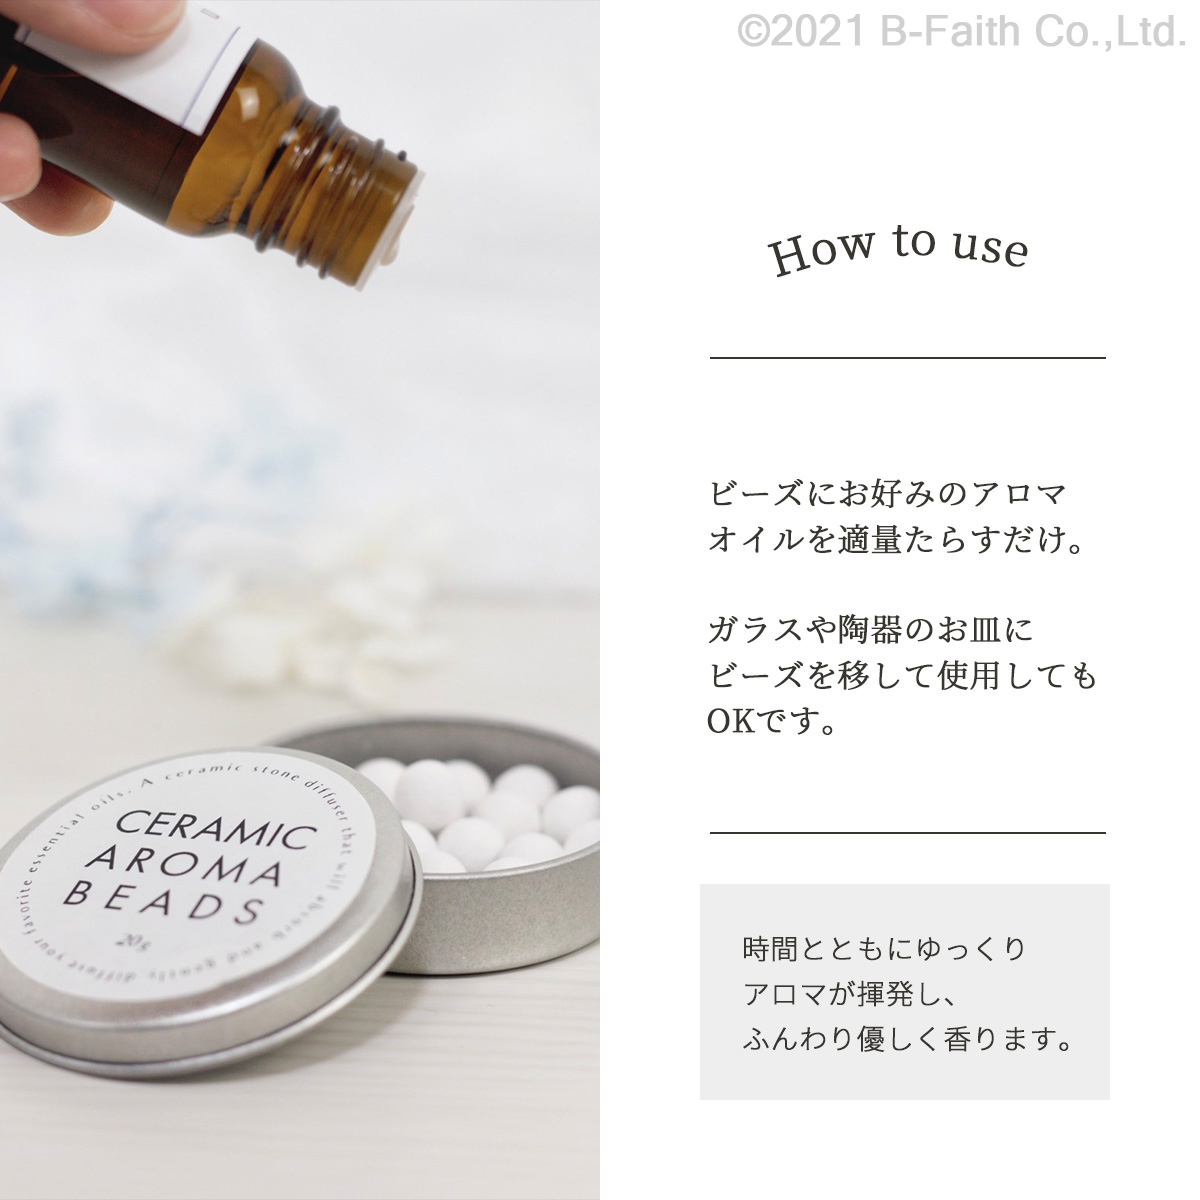  ceramic aroma beads approximately 25g aroma Stone can entering lovely stylish made in Japan stone . unglazed pottery . white aroma diffuser simple stone 